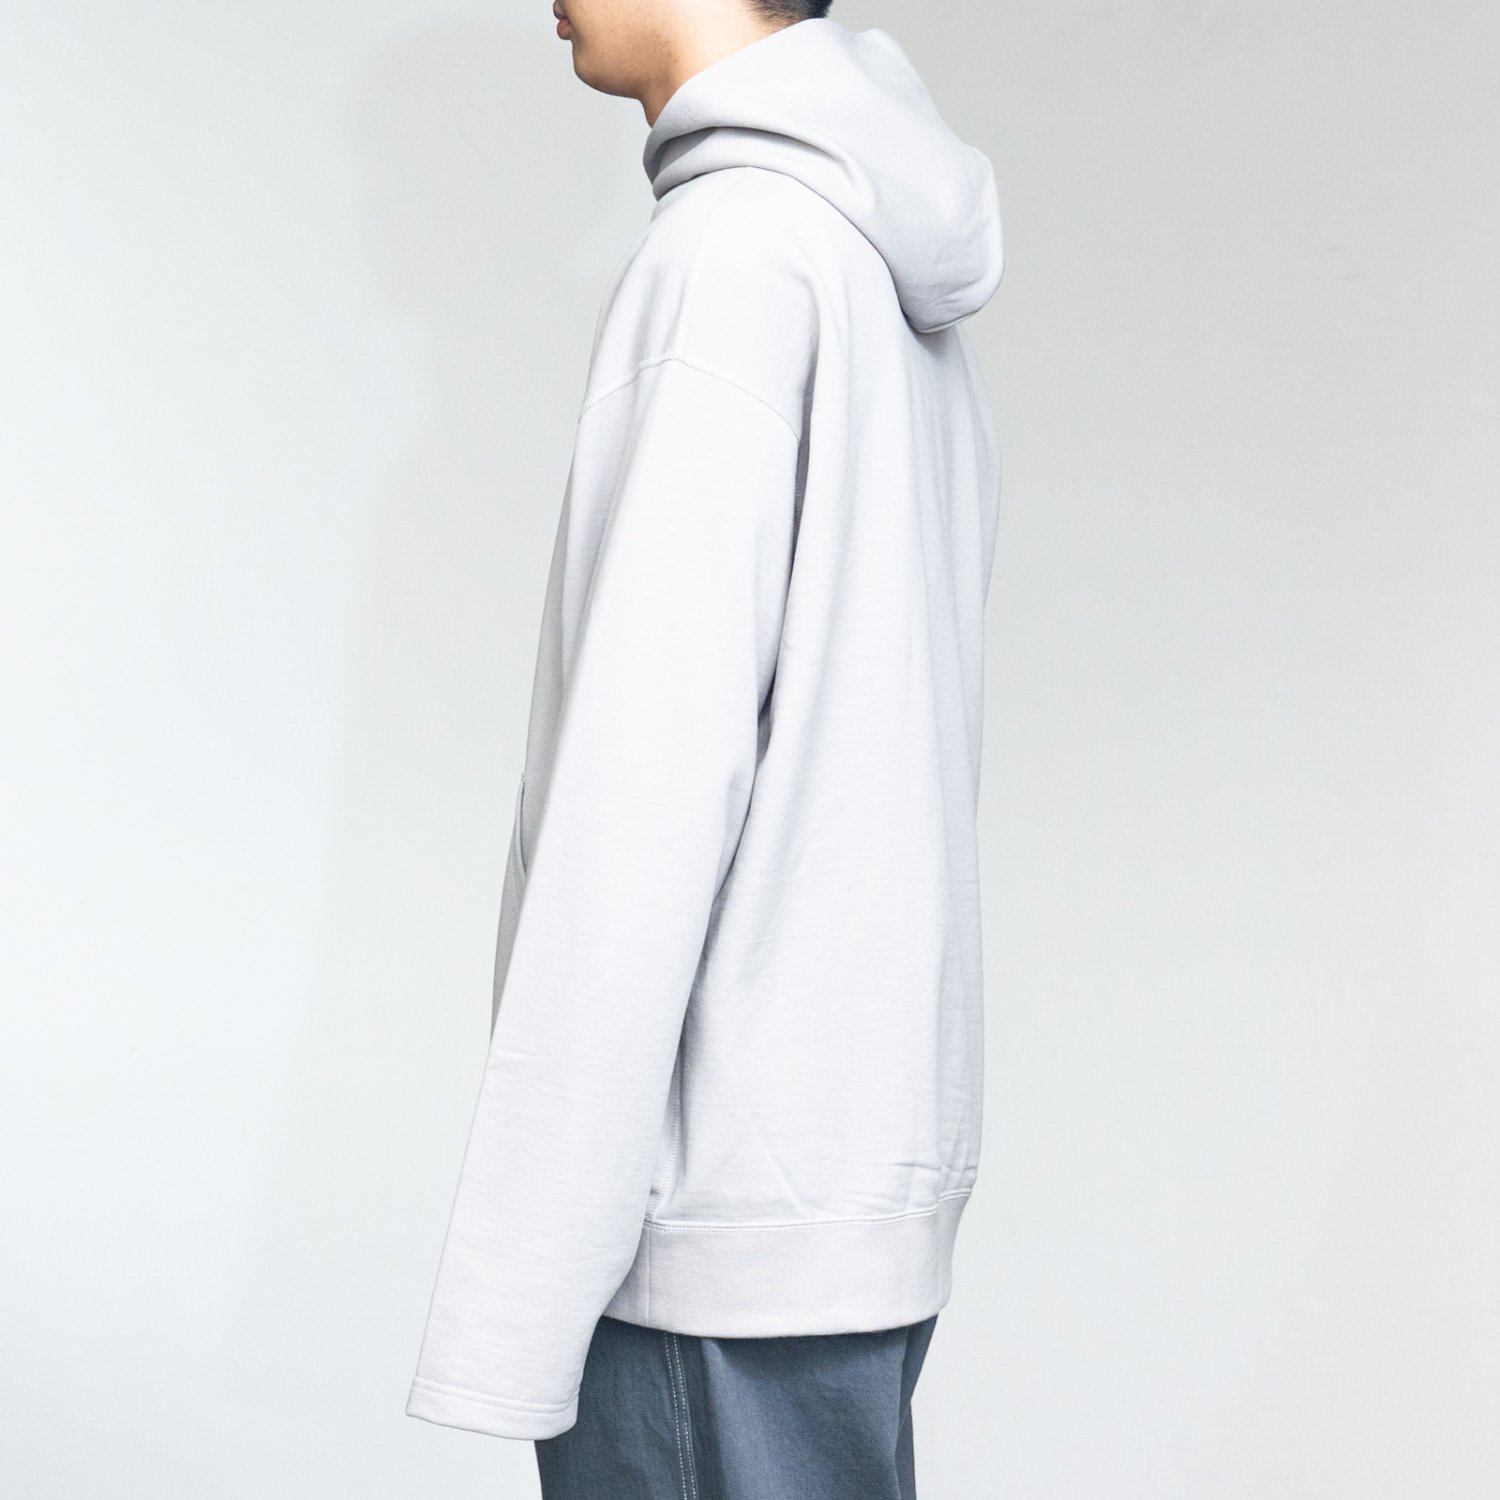 Graphpaper * Compact Terry Roll-Up Sleeve Hoodie * Gray